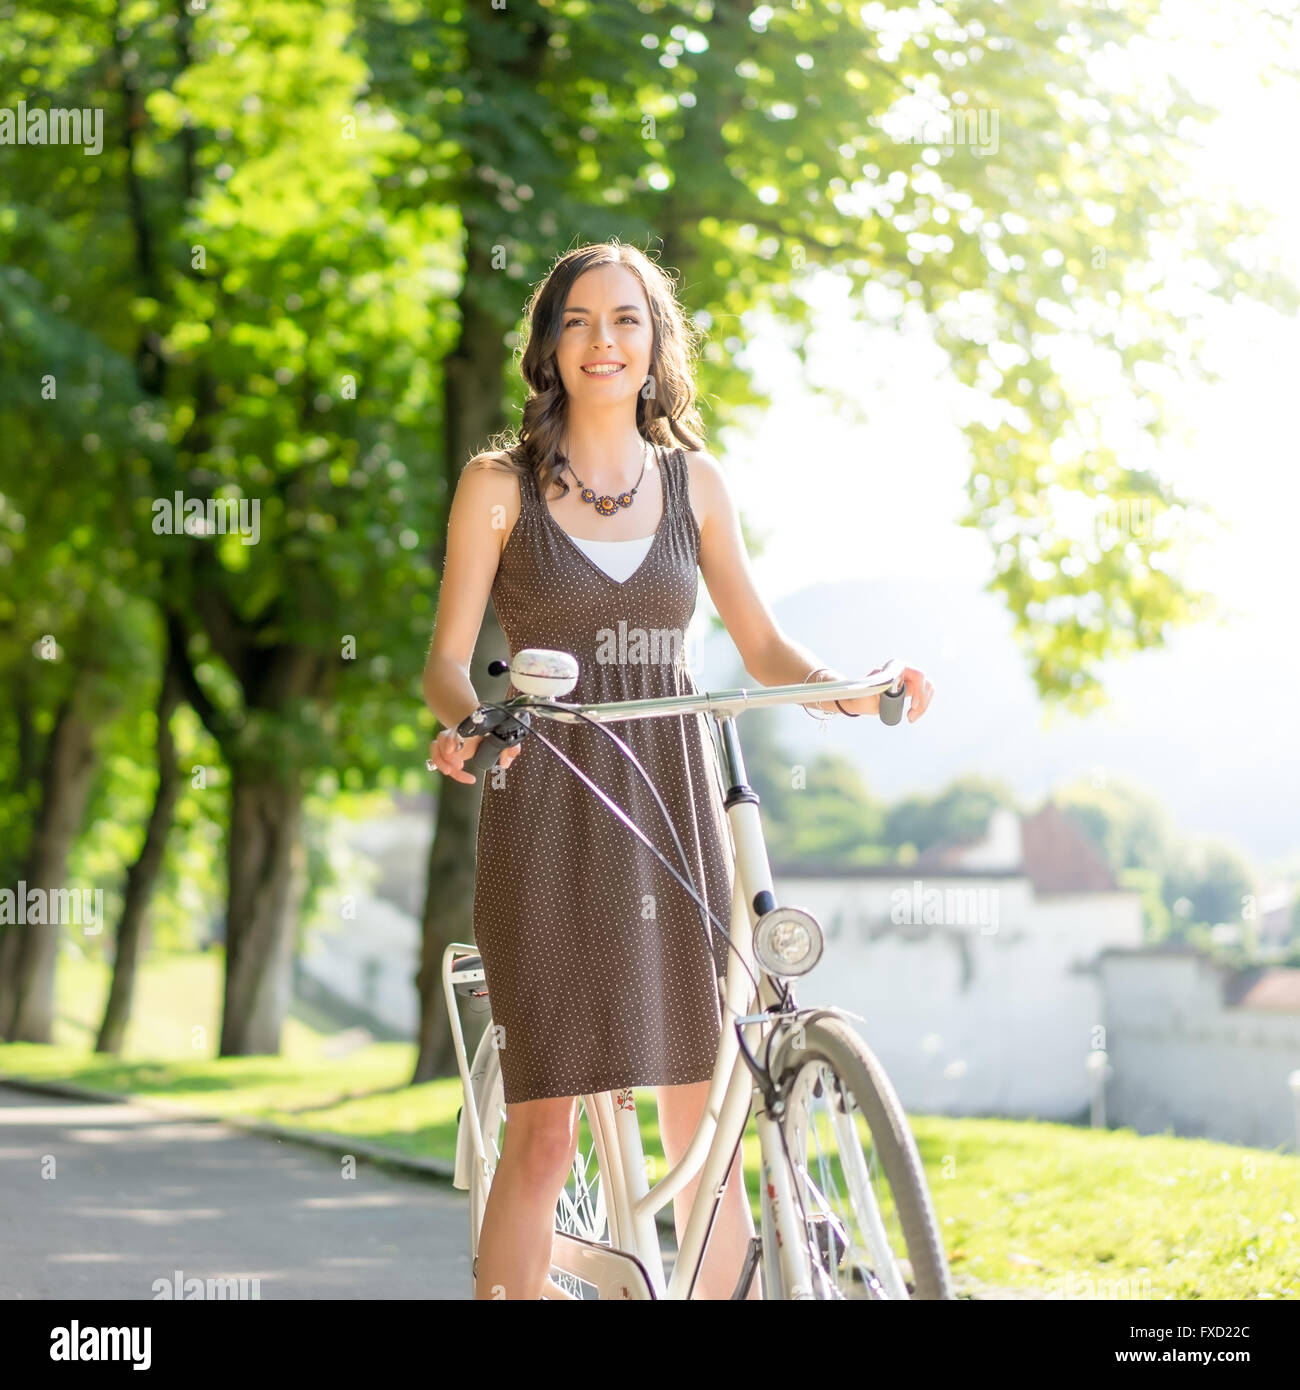 Bike In A Skirt: What To Wear Under There – Bike Pretty